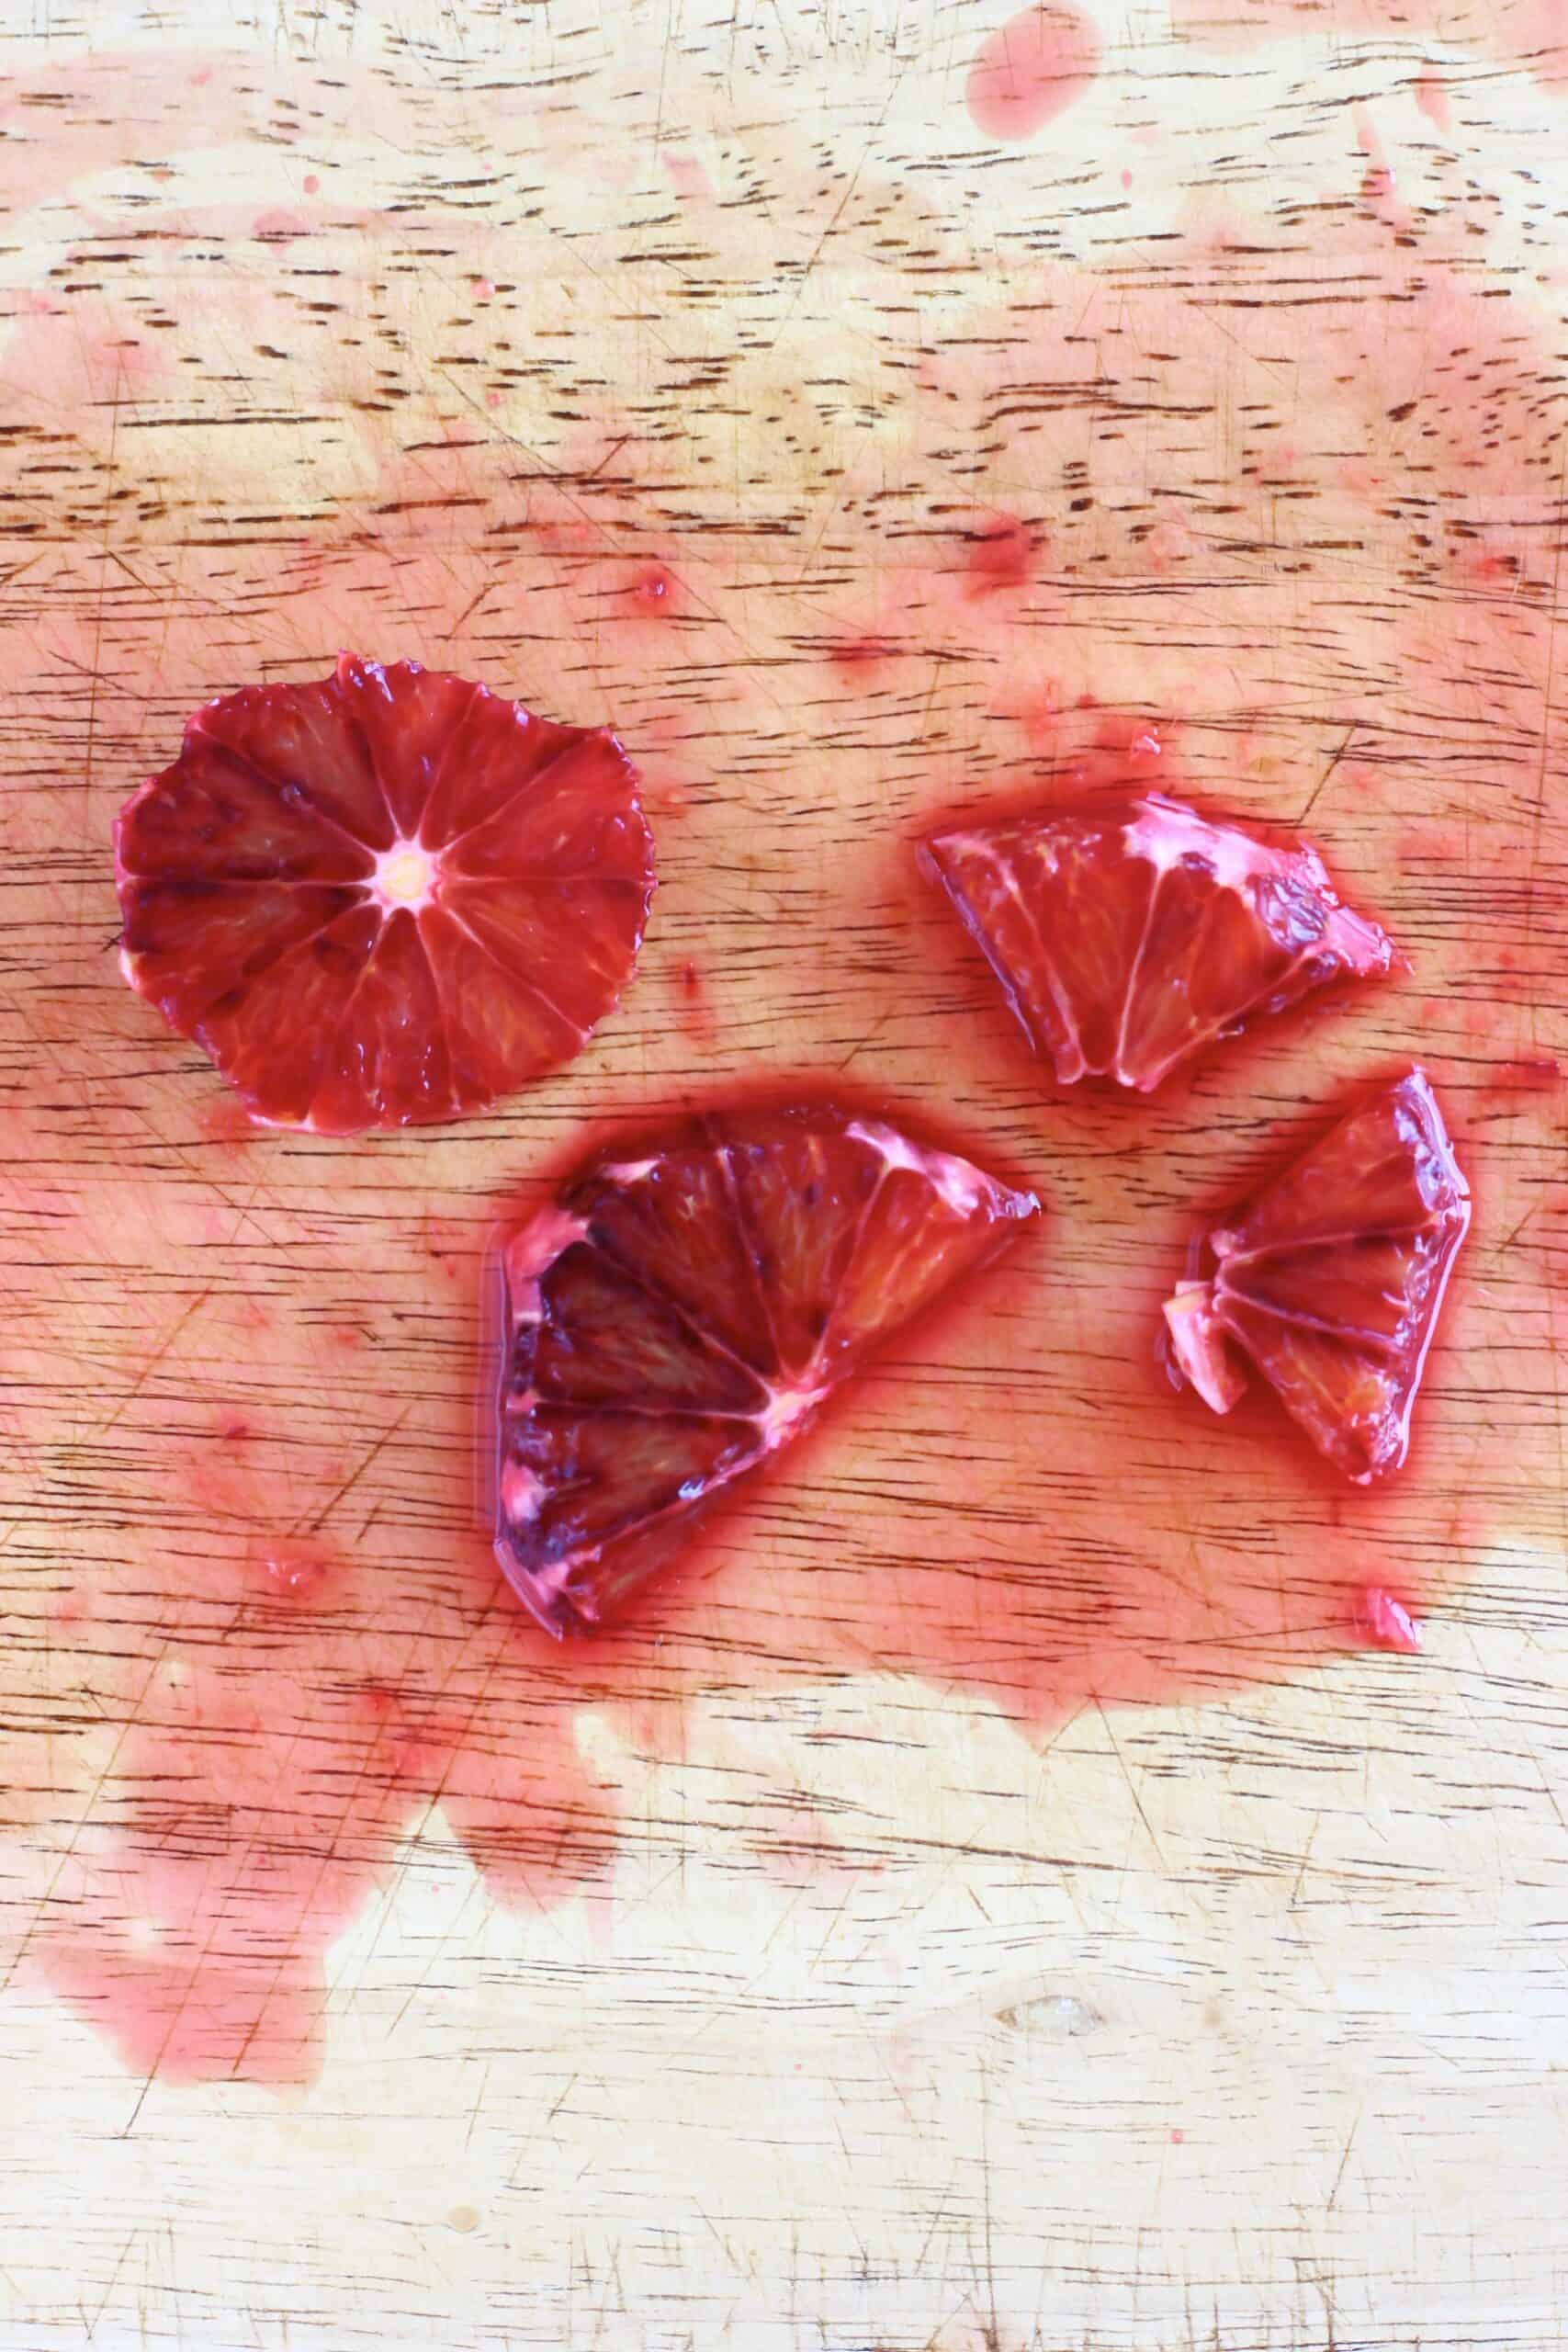 Blood orange slices cut into halves and quarters on a chopping board